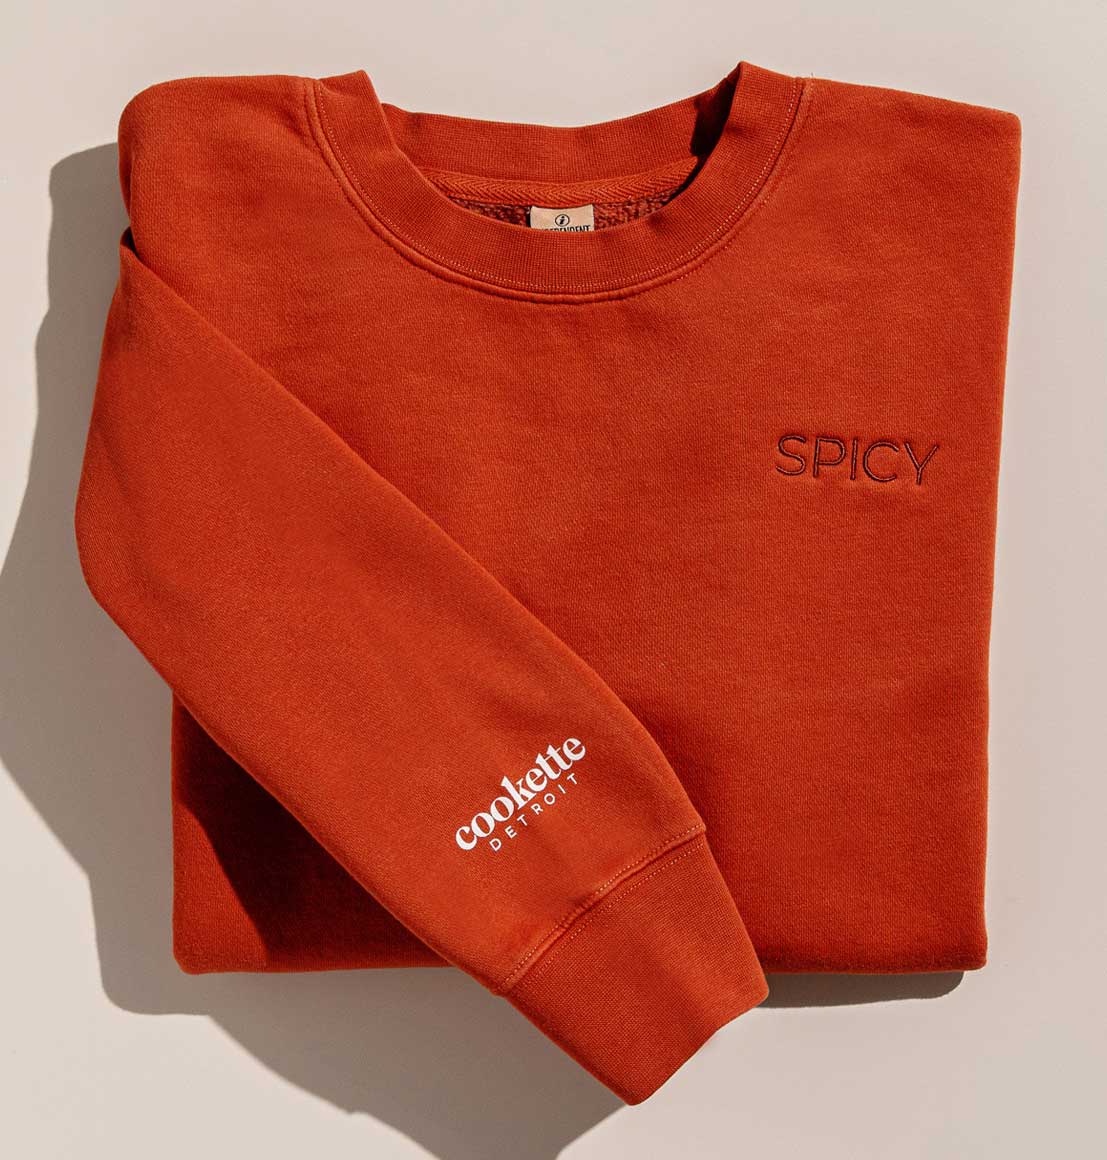 Incredibly cozy sweatshirt with the word "spicy" embroidered on the left size of the chest. The Cookette Detroit logo is screenprinted on the sleeve in white. Both the sweatshirt and embroidered word are in a burnt orange/chili pepper color.